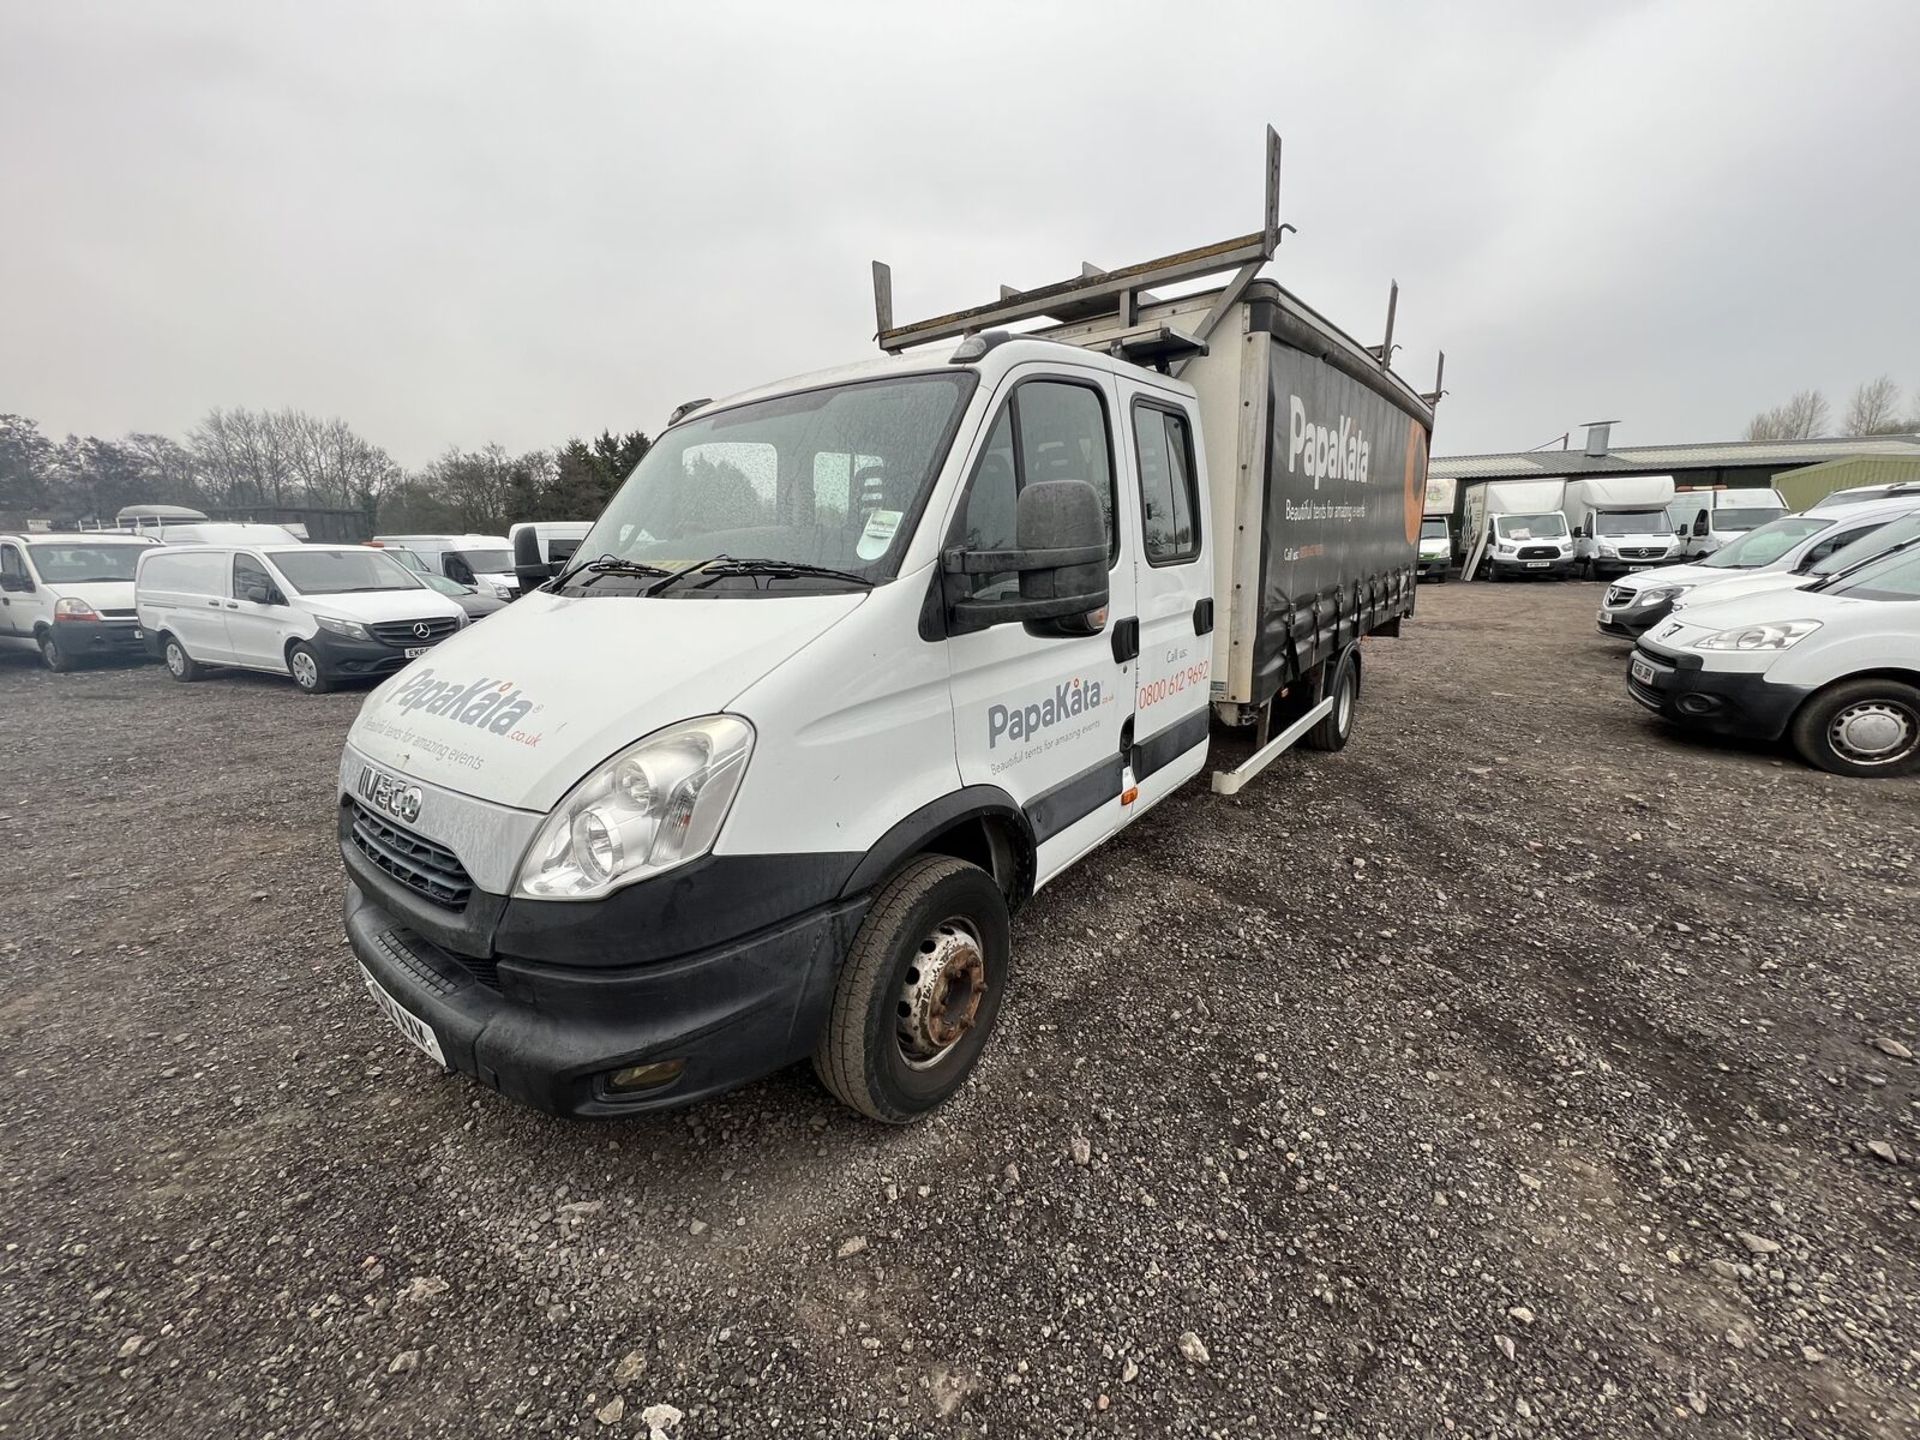 PRECISION IN MOTION: 2012 IVECO DAILY 70C17 - WHERE PERFORMANCE MEETS CARGO EXCELLENCE - Image 2 of 15